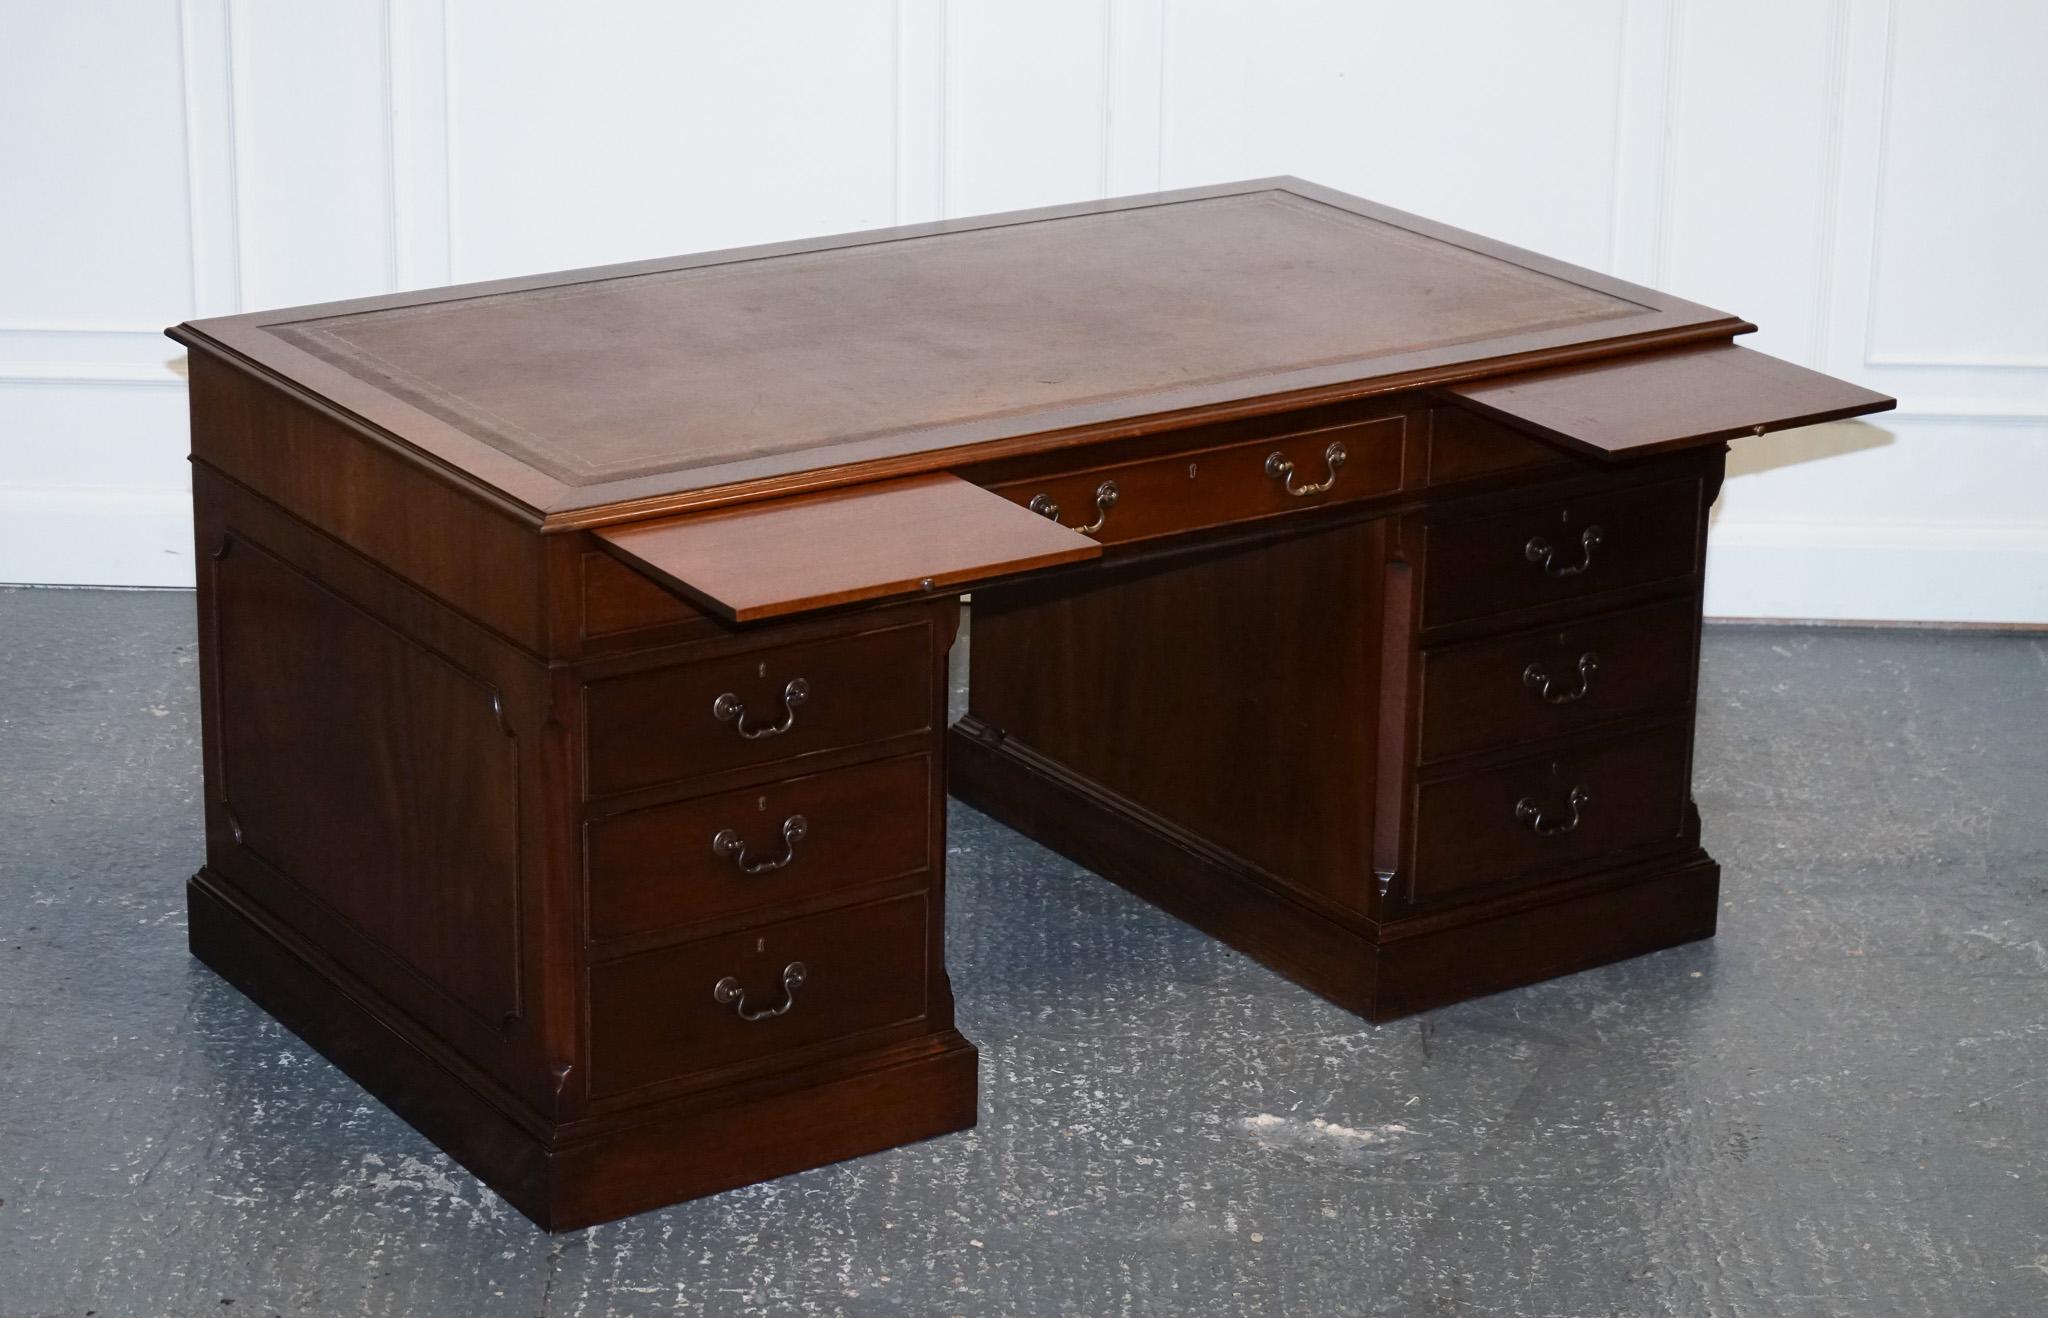 Hand-Crafted STUNNING LARGE TWiN PEDESTAL DESK BROWN LEATHER TOP SLIDING OUT TRAYS 8 DRAWERS For Sale